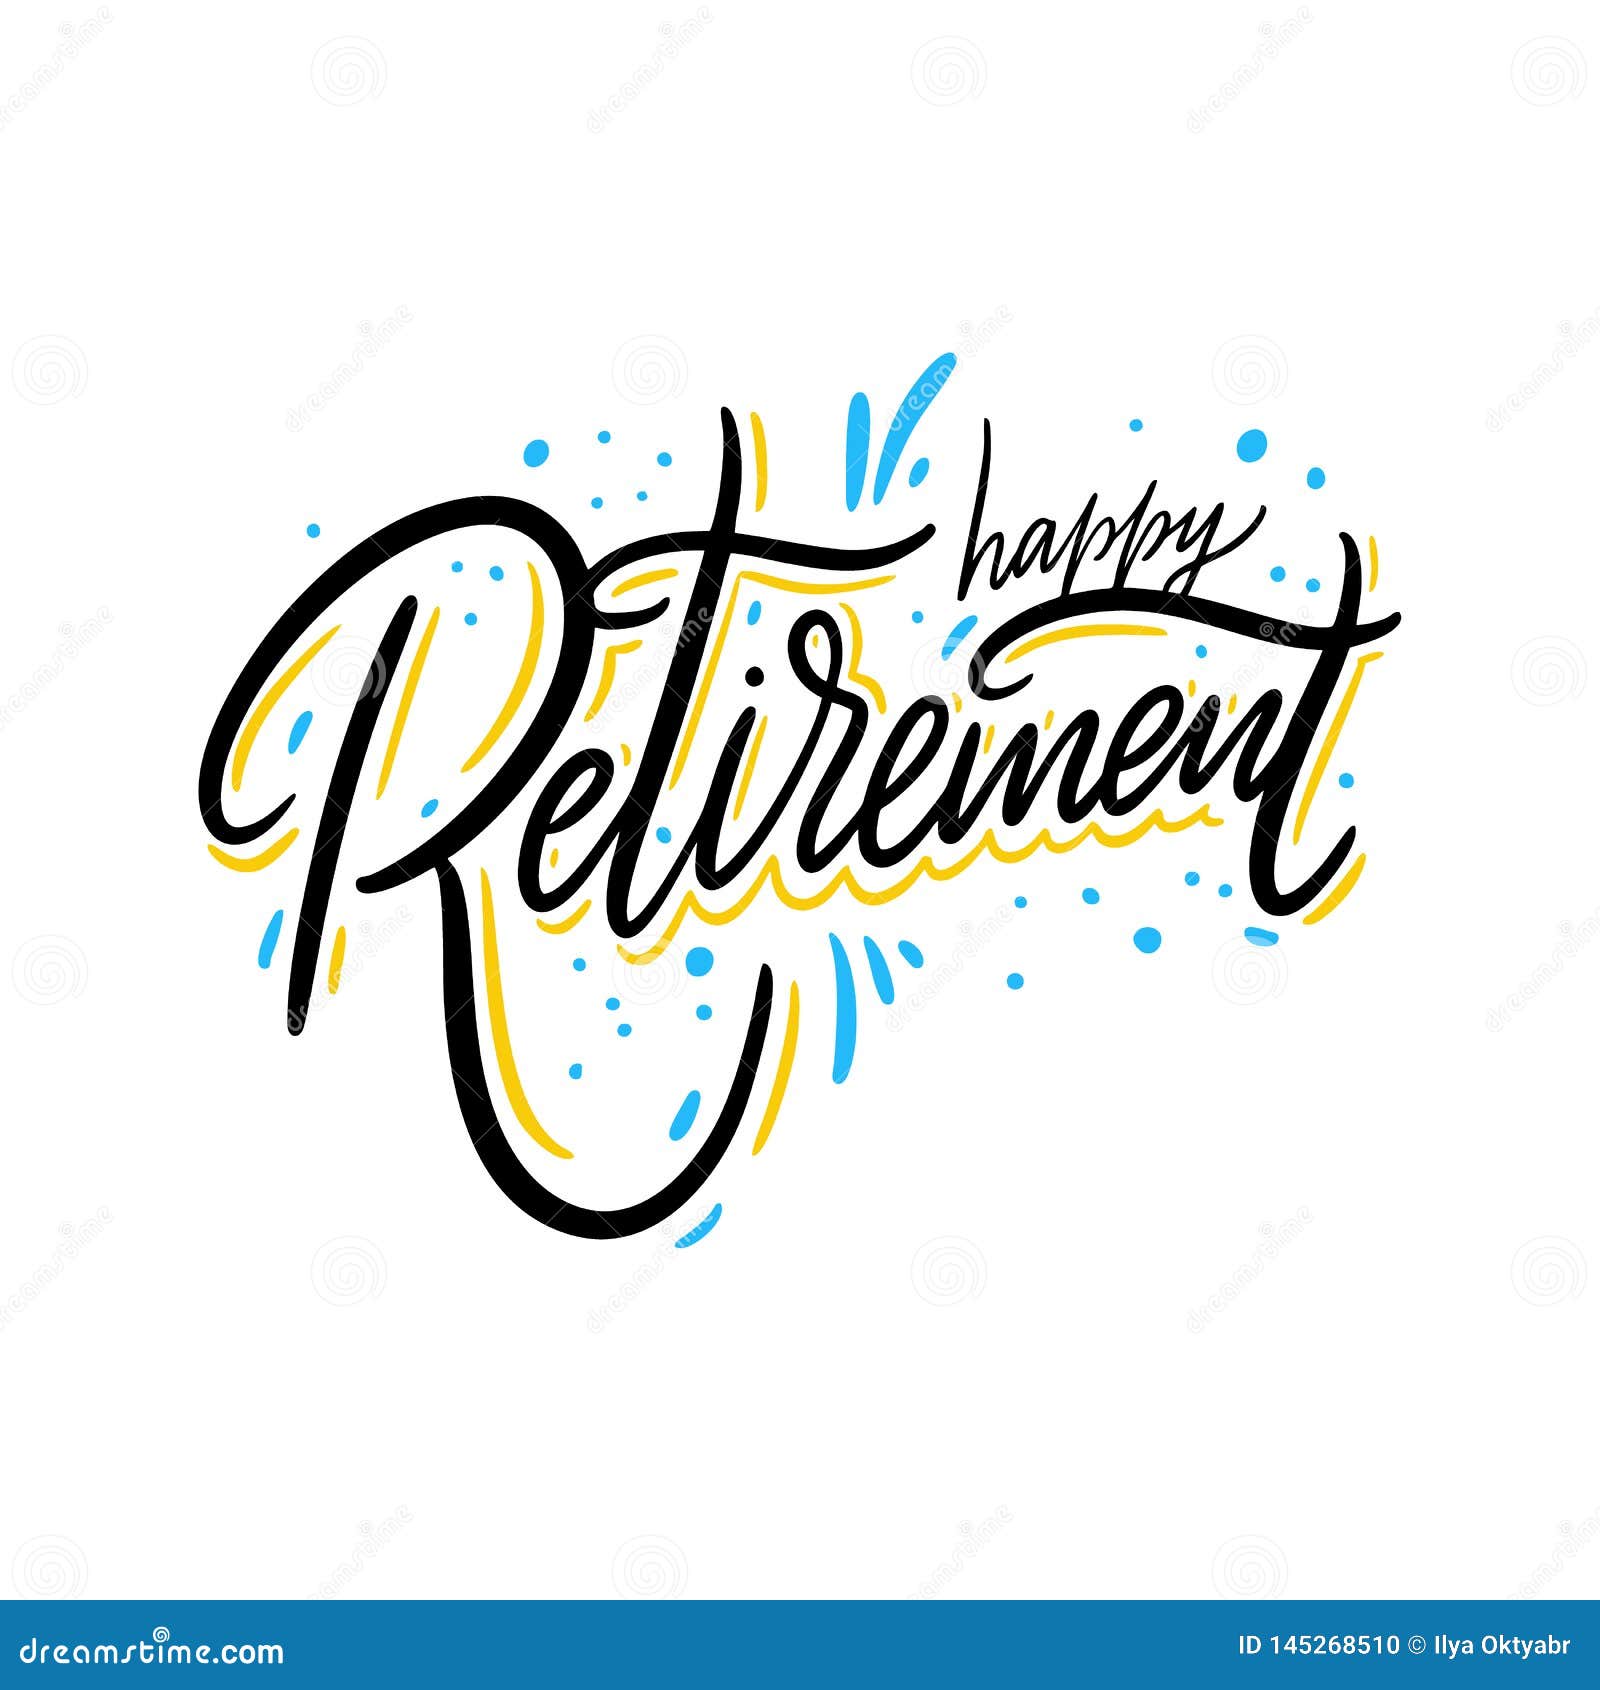 Download Happy Retirement. Hand Drawn Vector Lettering. Isolated On ...